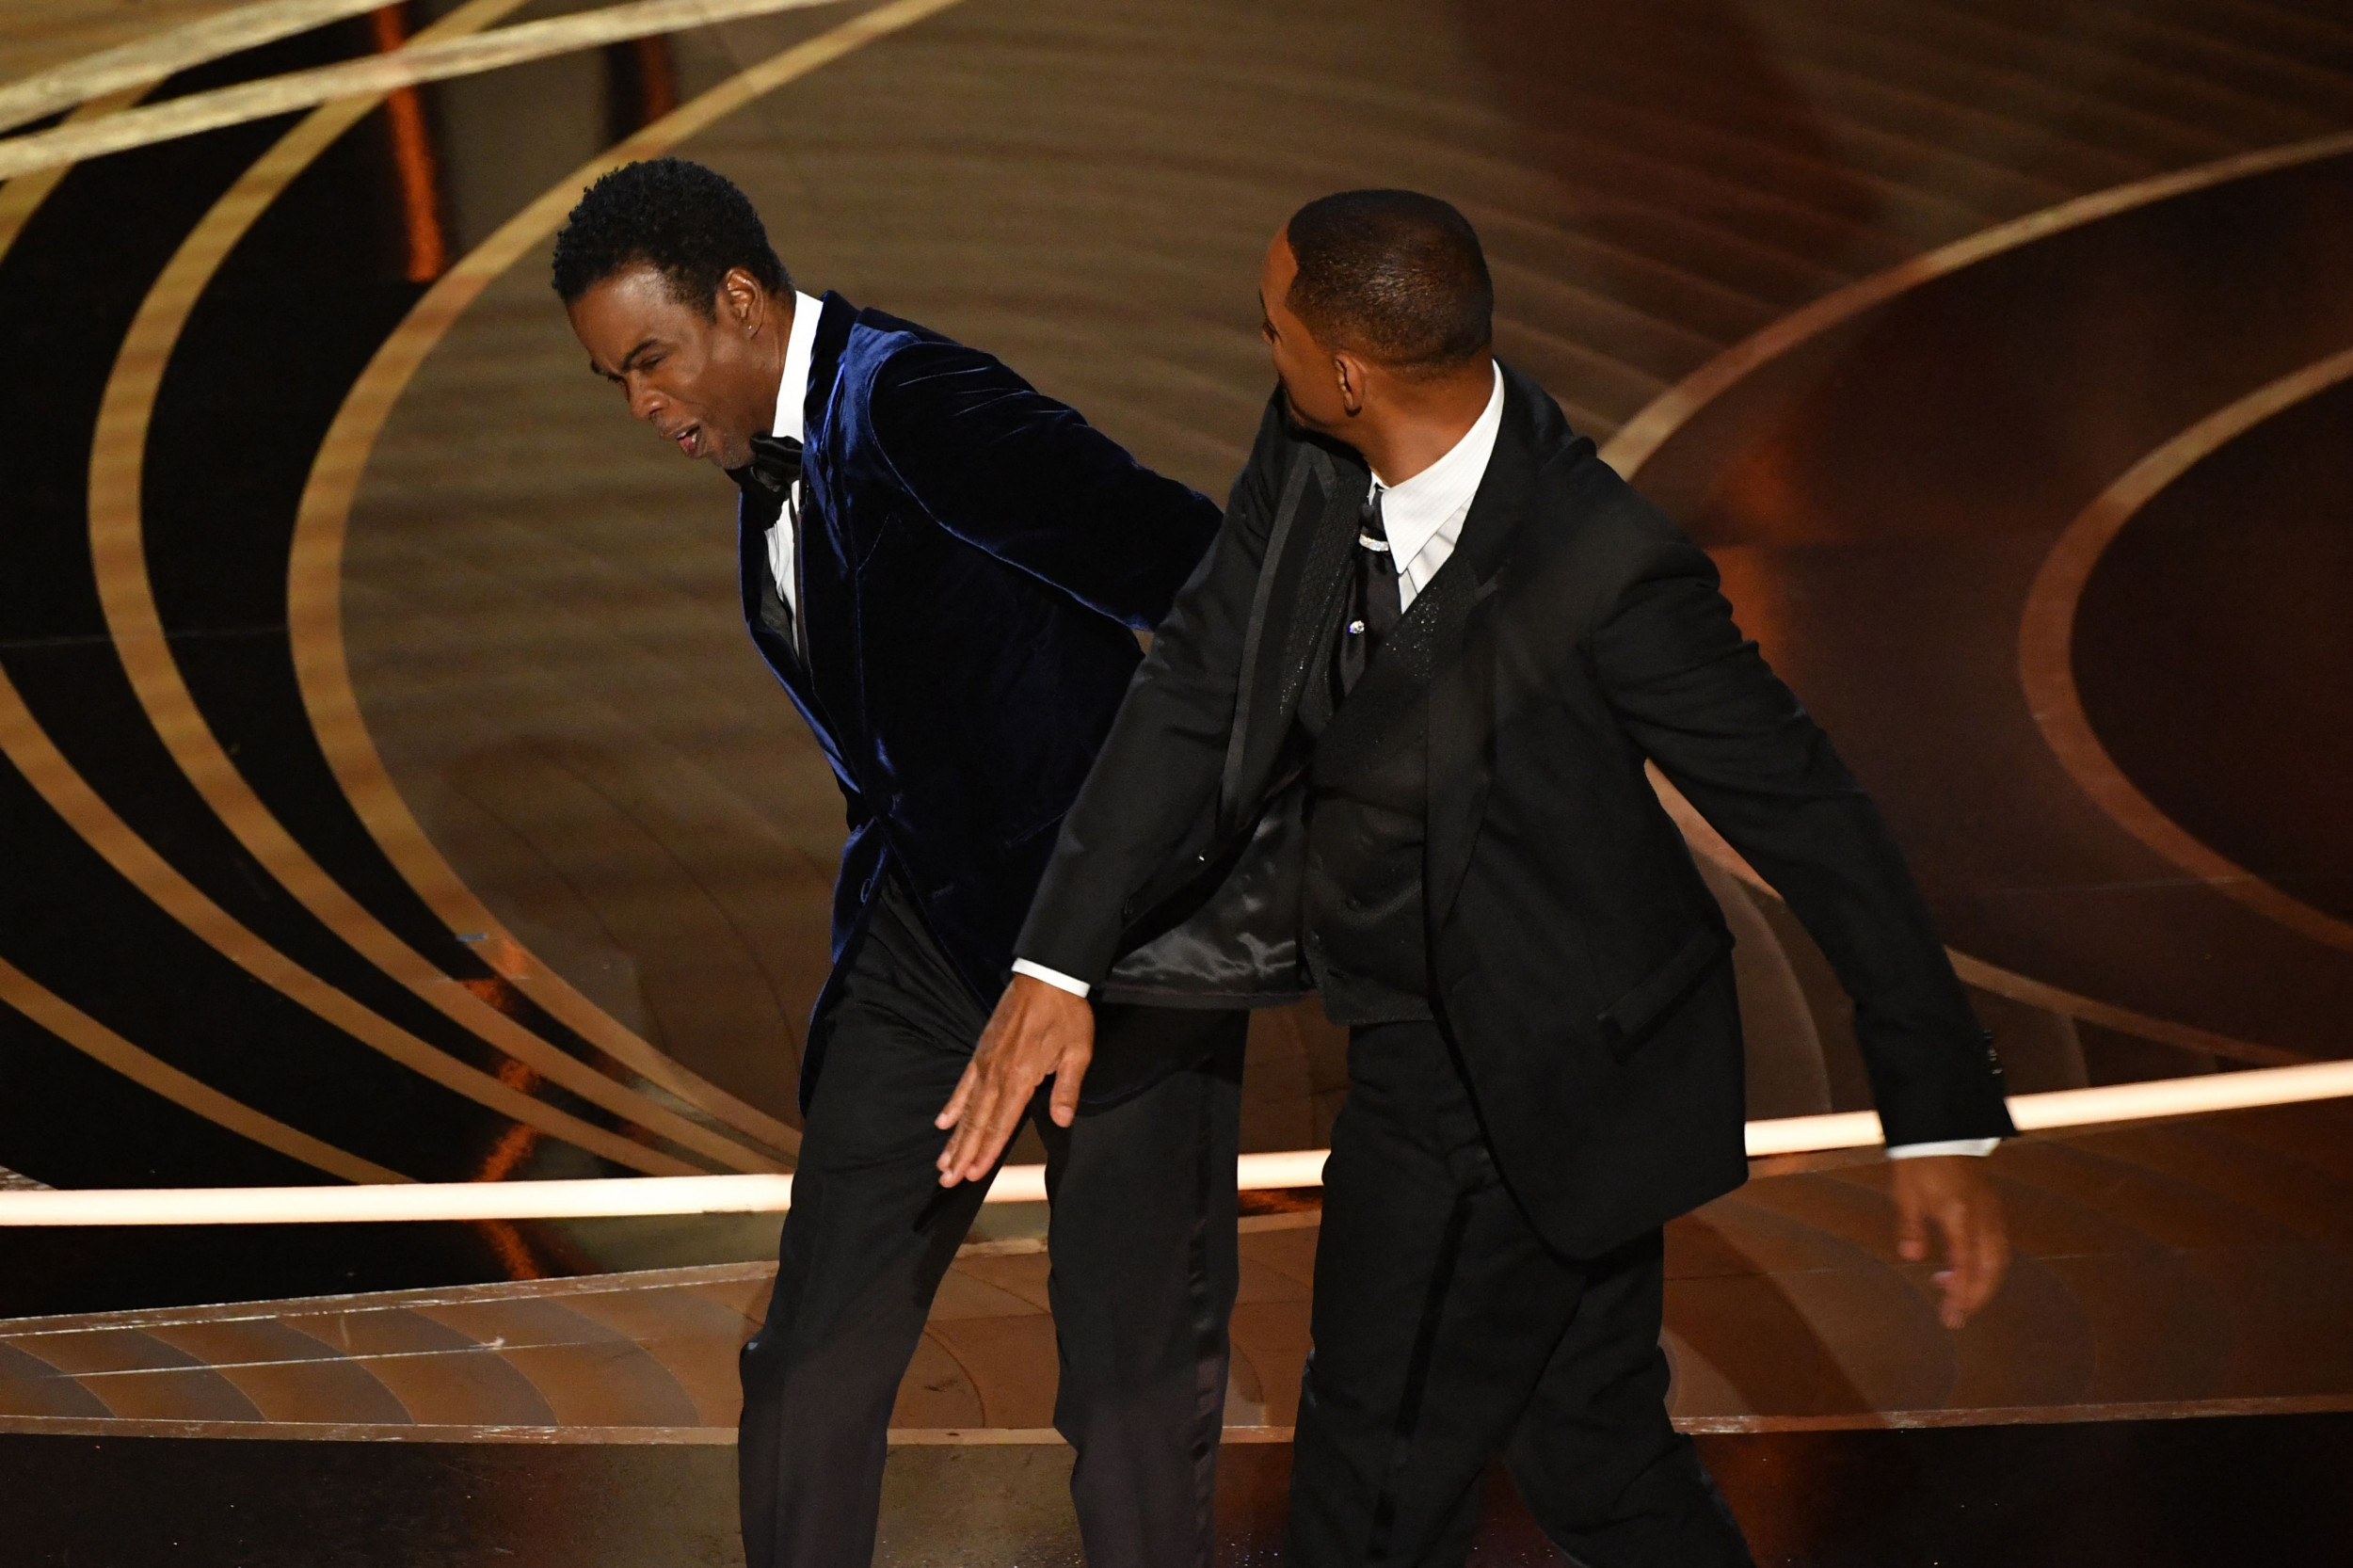 Will Smith Oscars Slap Sparks Concerns for Comedians' Safety During Shows